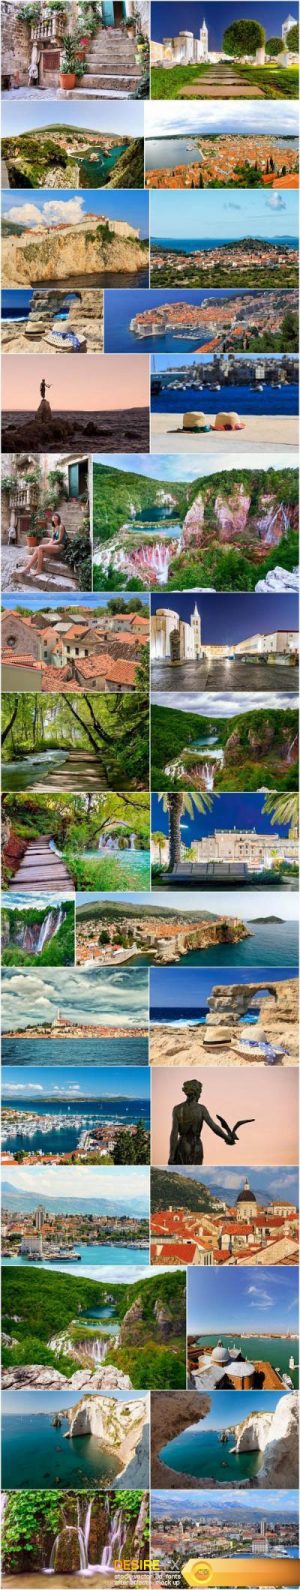 Vacation in Croatia 2 – Set of 32xUHQ JPEG Professional Stock Images